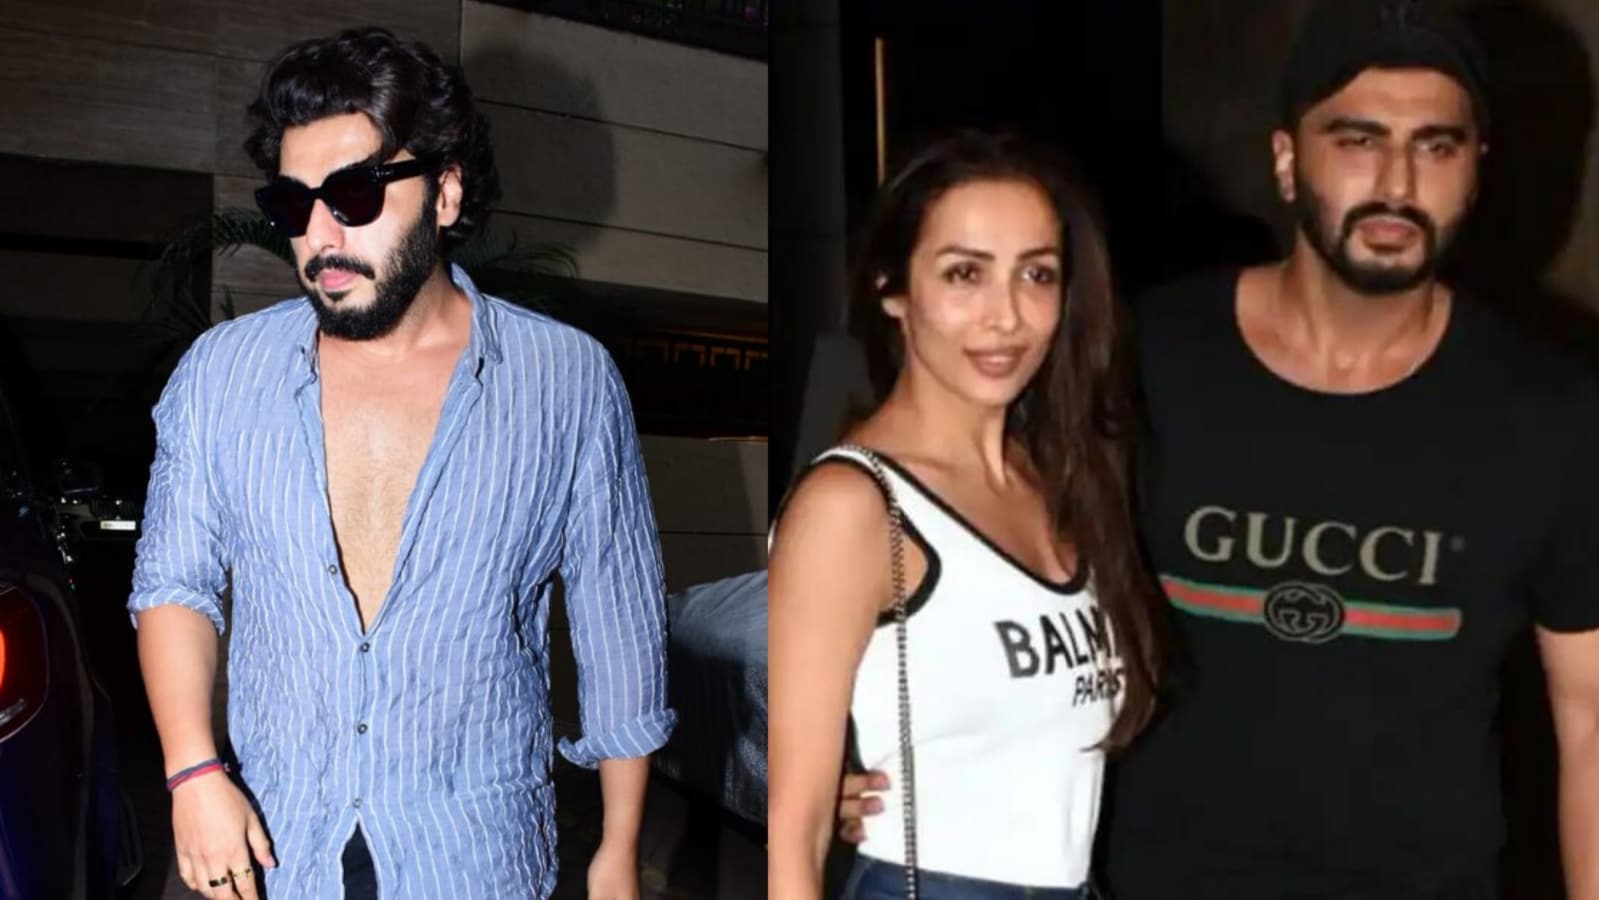 Arjun Kapoor visits girlfriend Malaika Arora after her car accident, fans praise him for ‘taking care of her’. Watch